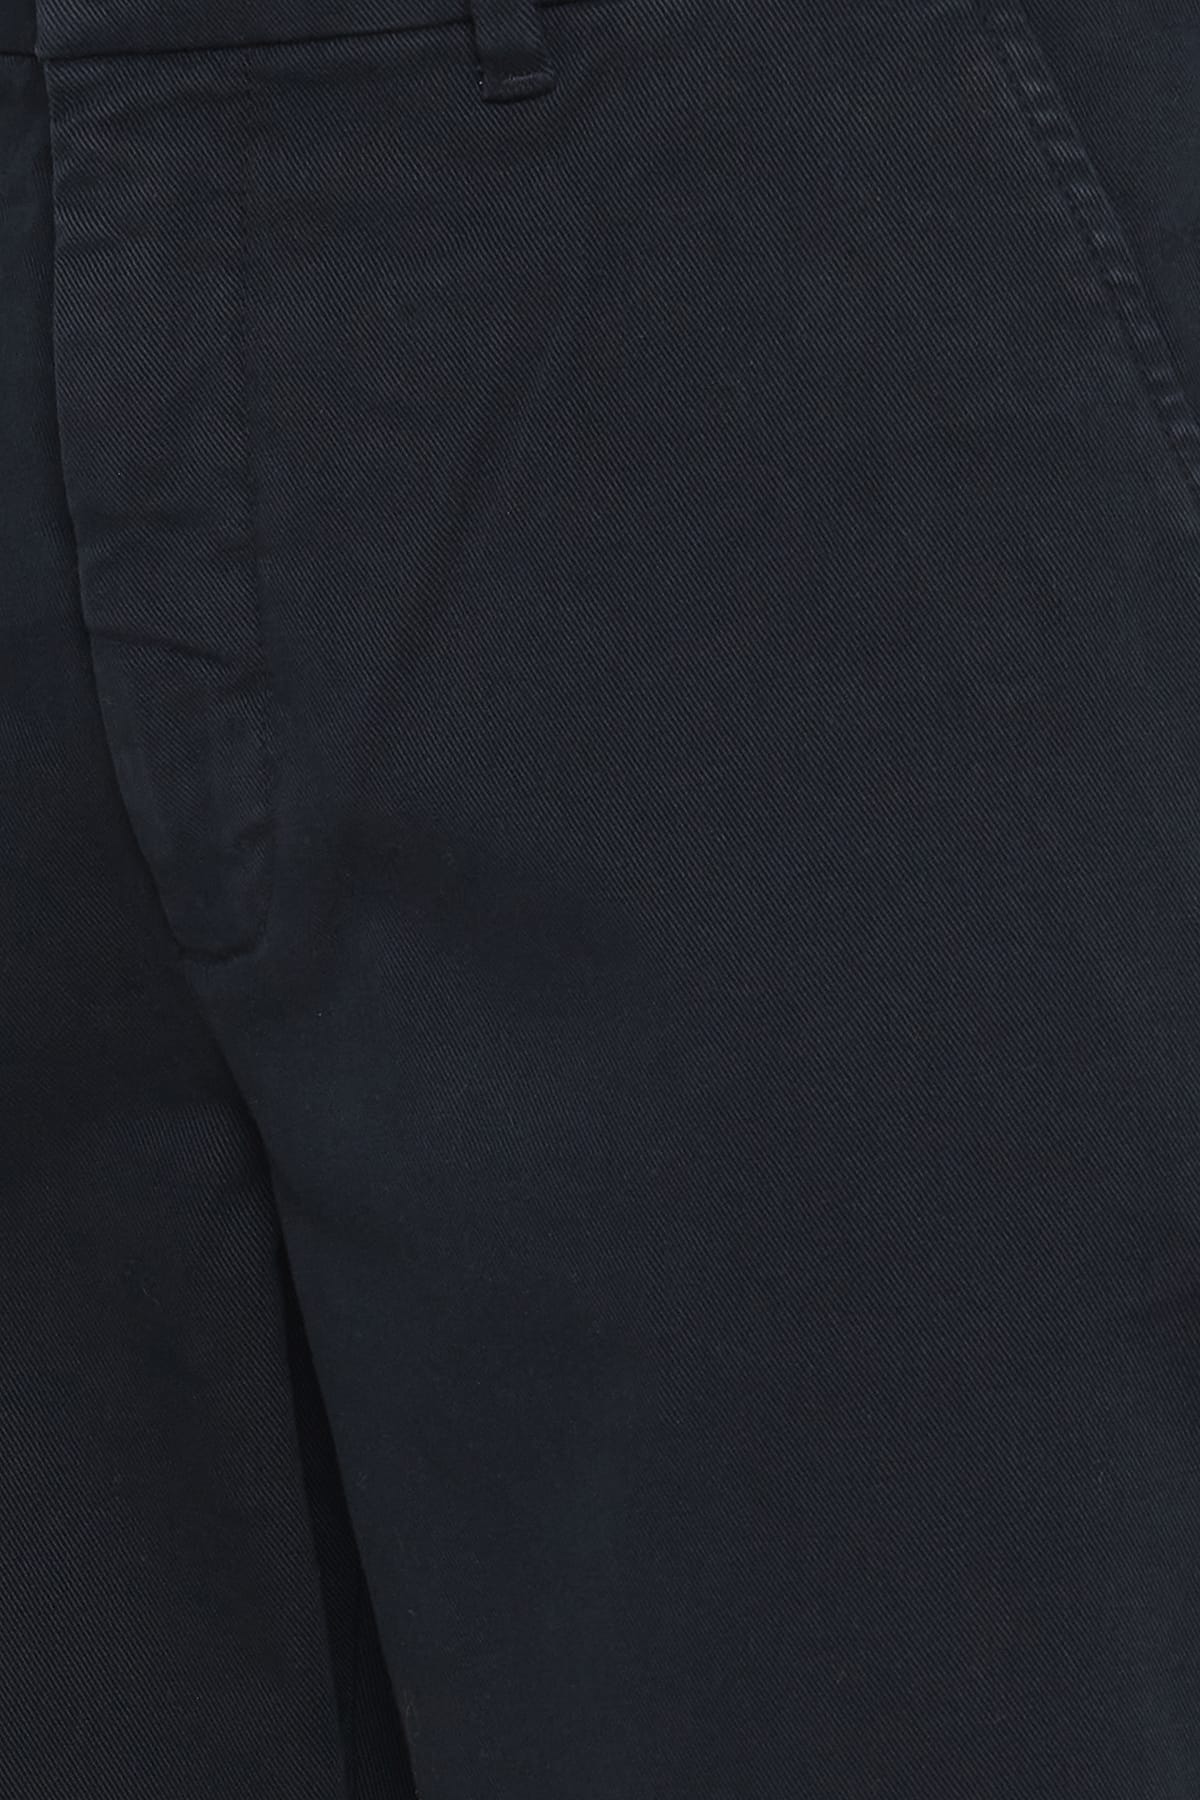 Hose Pepe relaxed pants Dark Navy Hose Casual Friday 